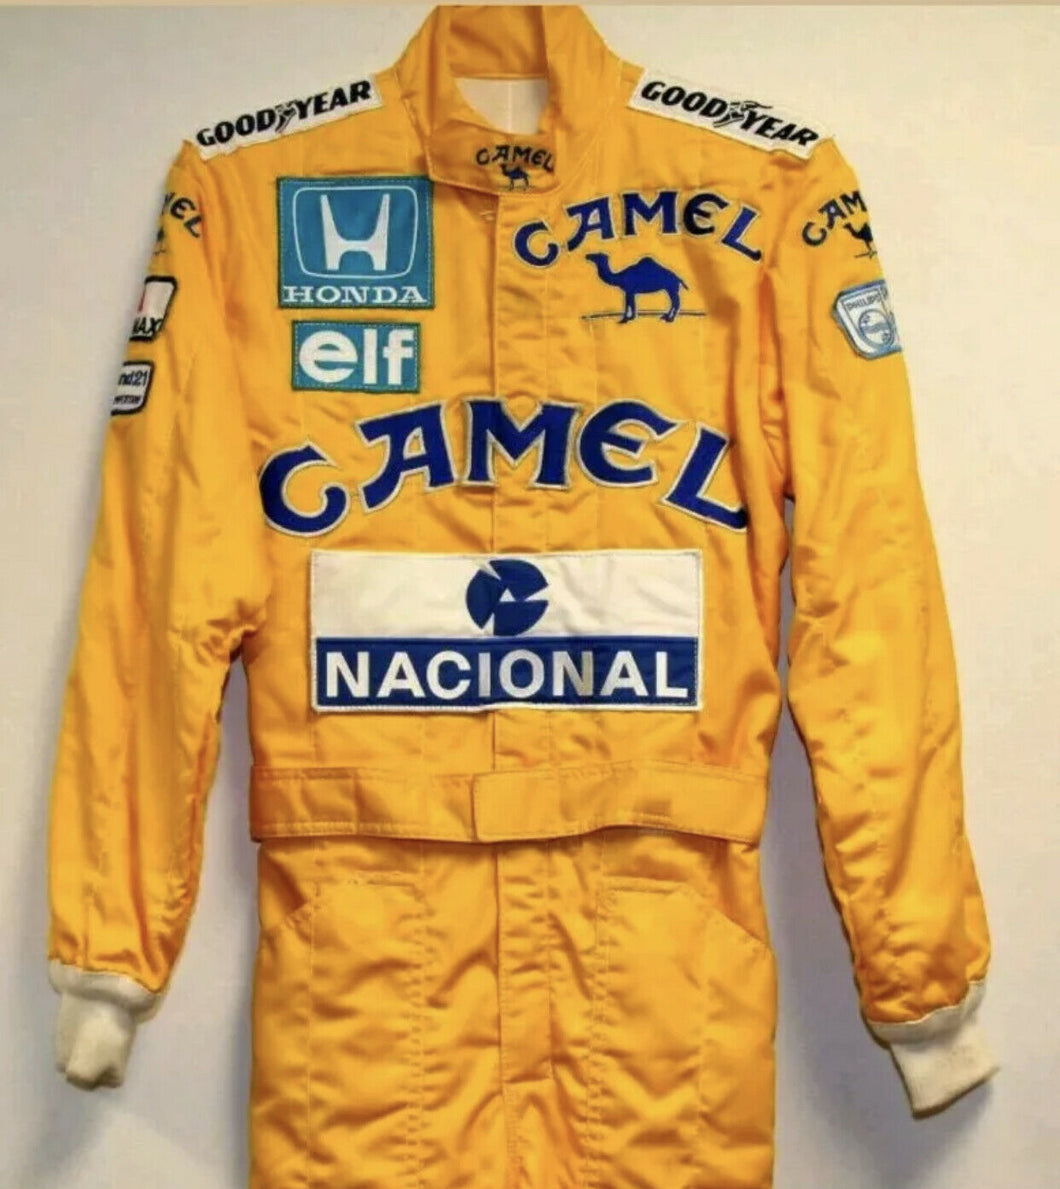 Ayrton Senna 1987 Camel Embroidered patches go kart race suit